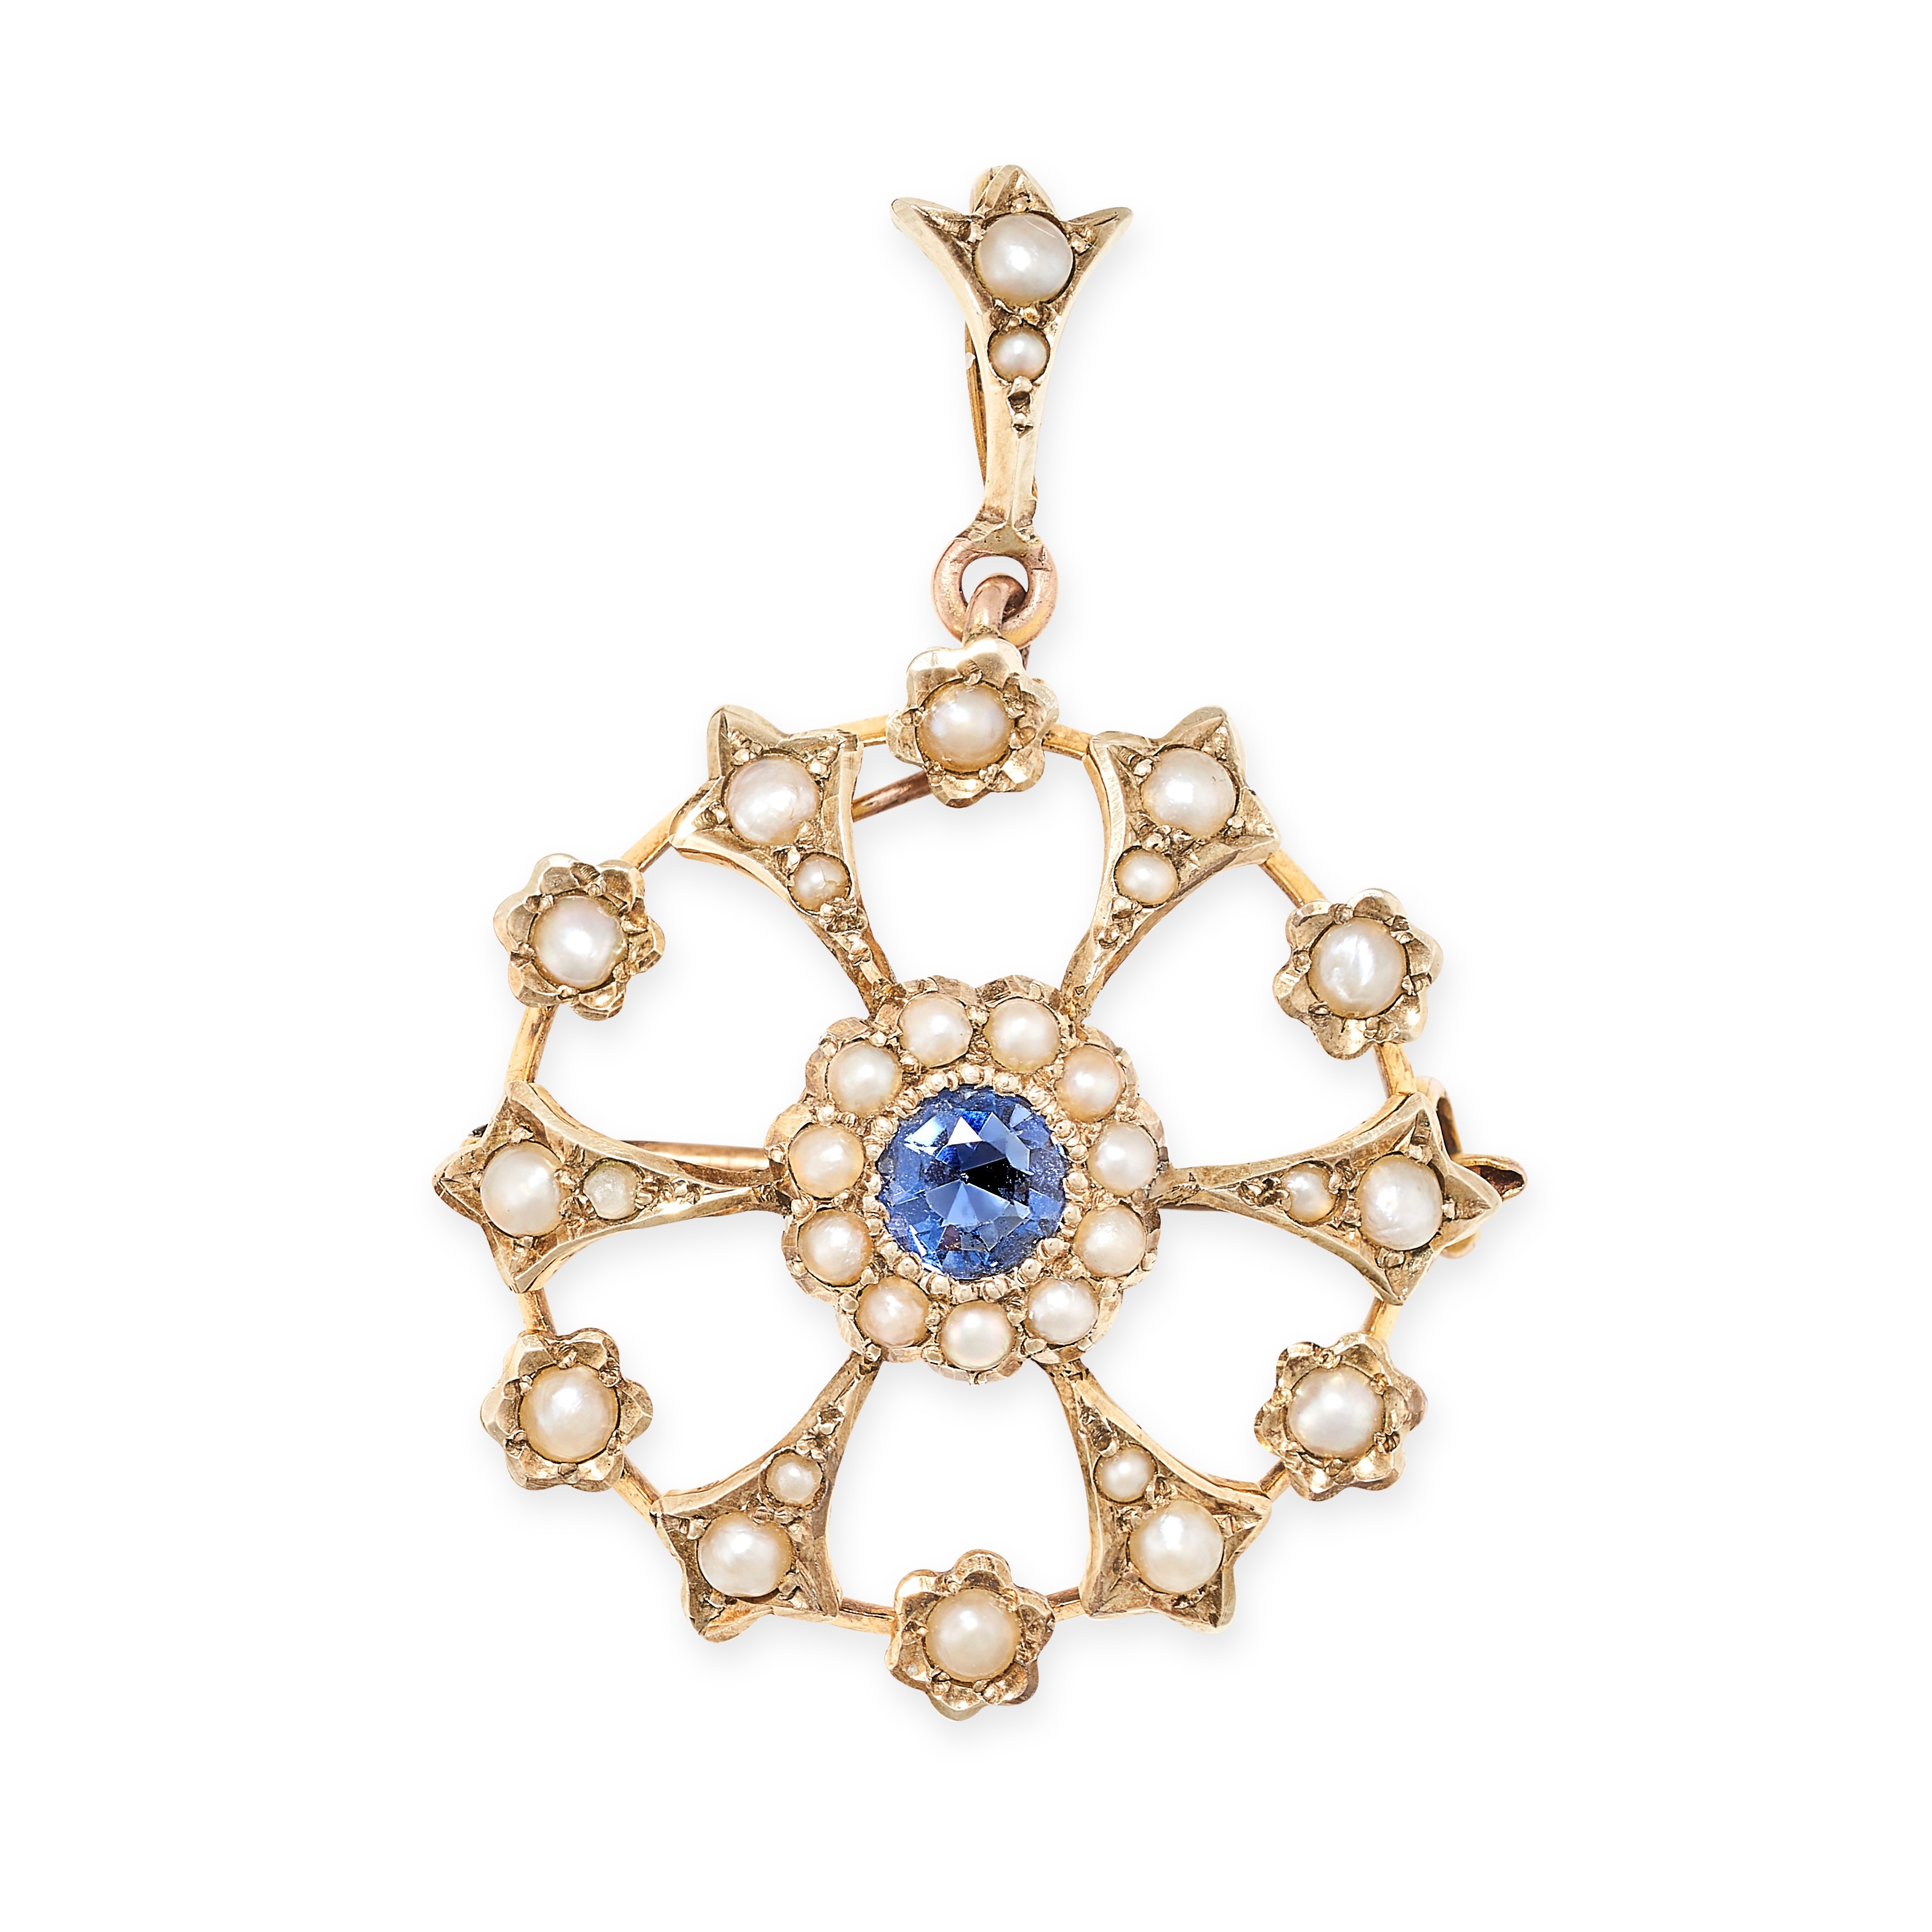 AN ANTIQUE EDWARDIAN SAPPHIRE AND PEARL BROOCH / PENDANT in yellow gold, set with a central round